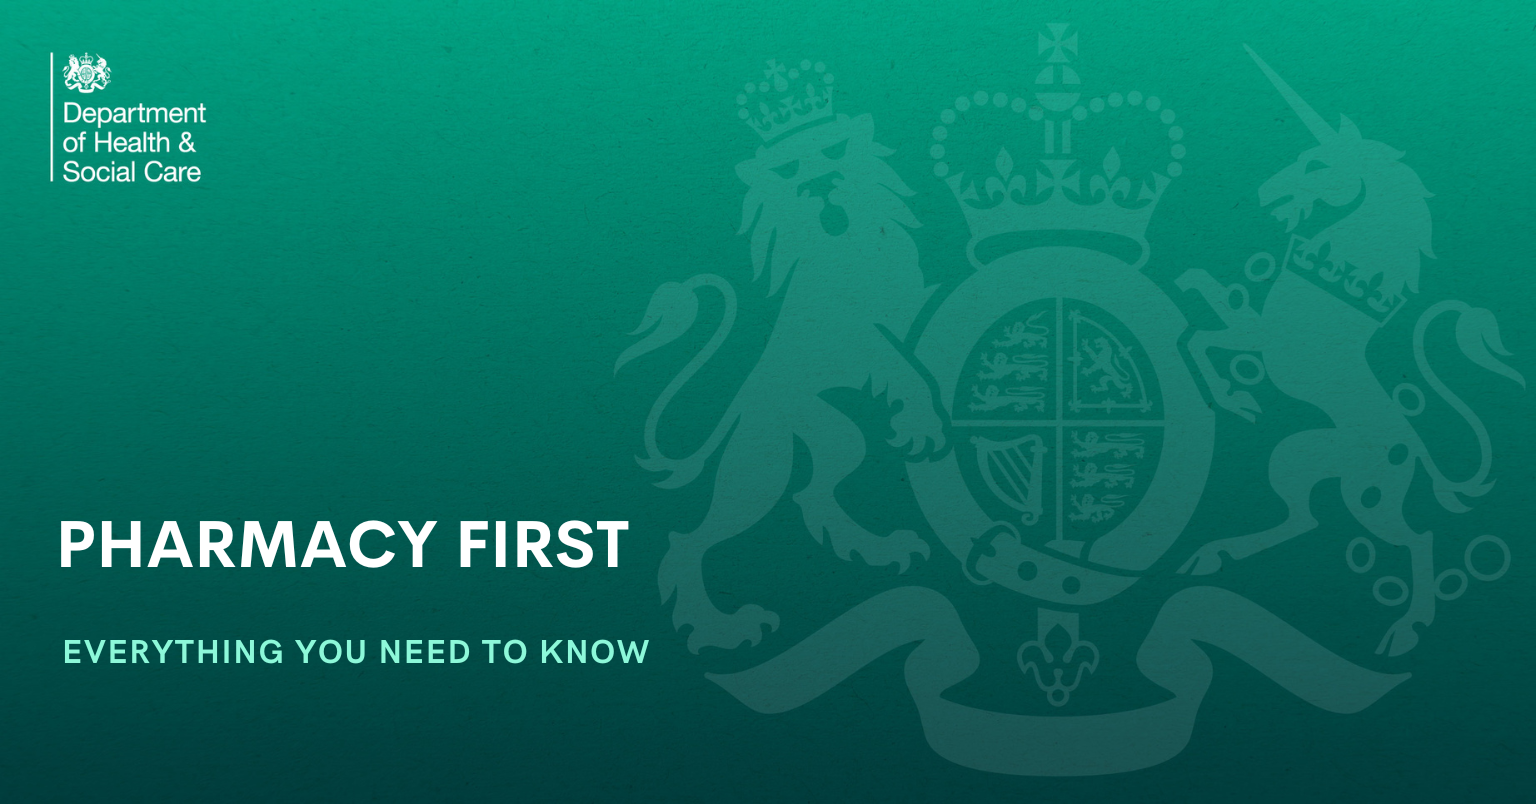 Pharmacy First: everything you need to know 